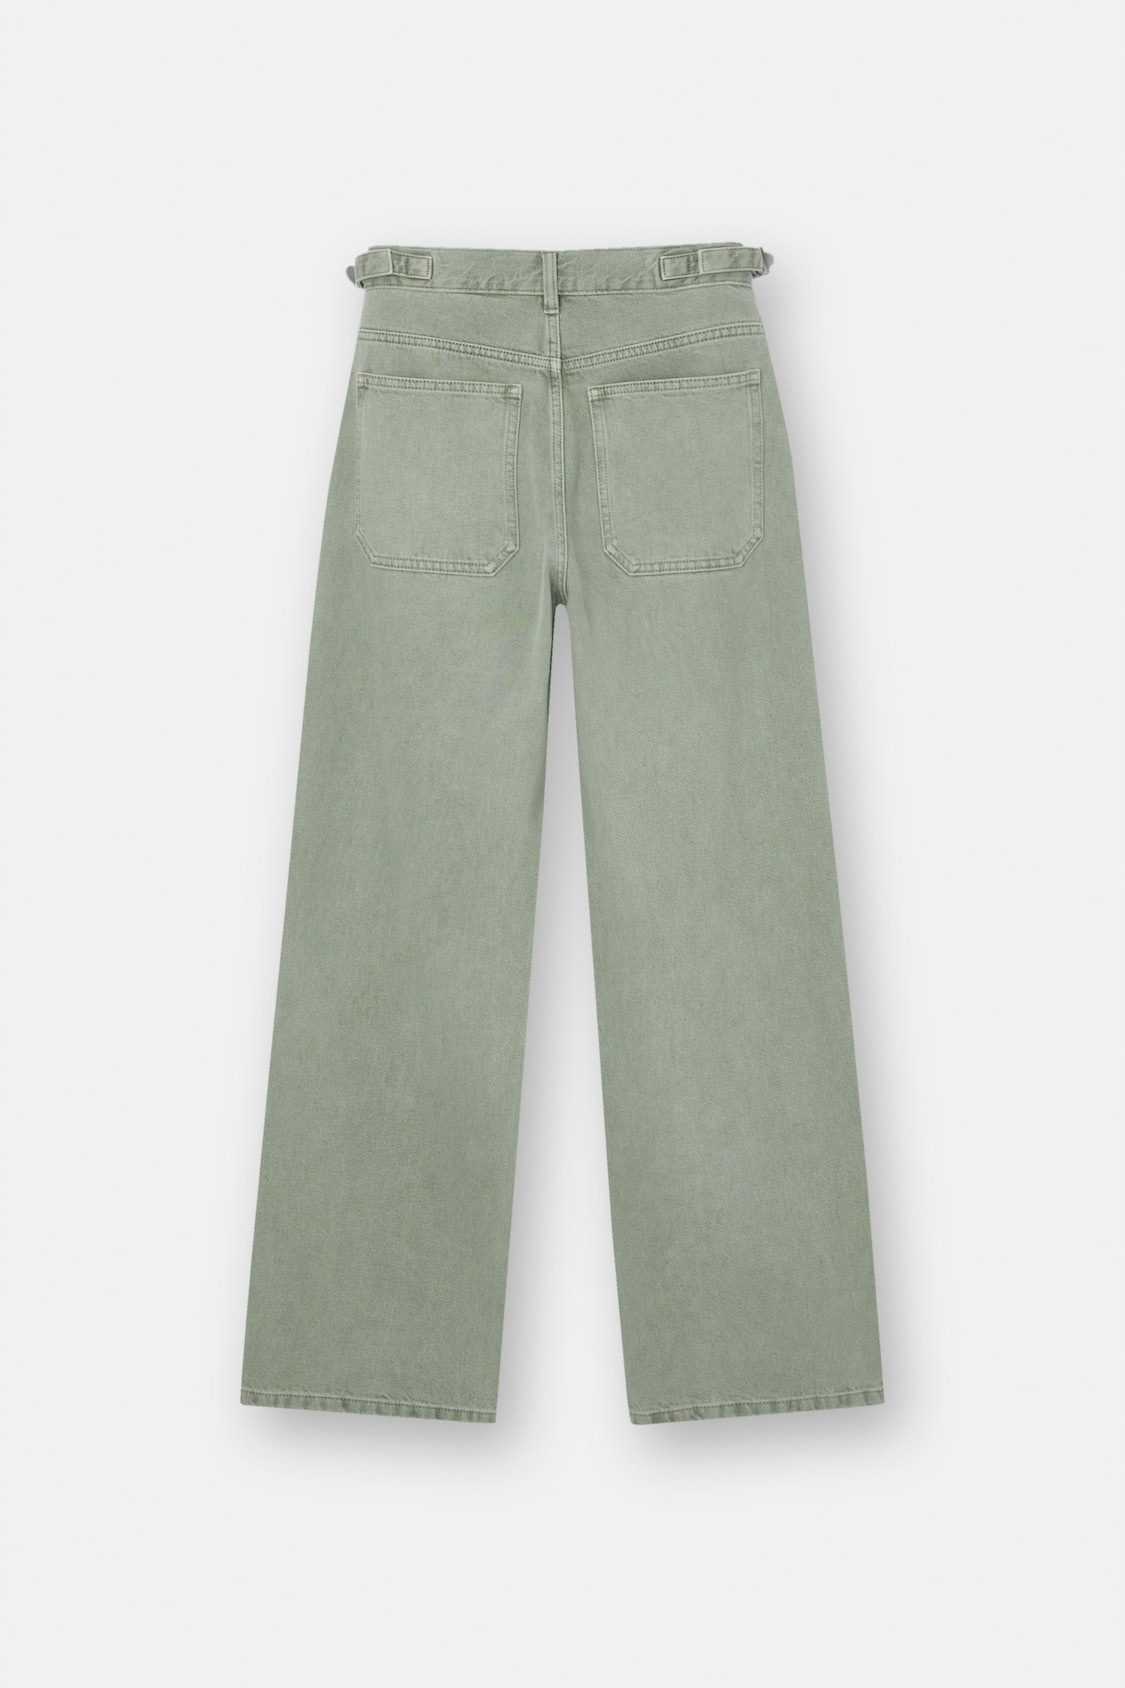 Carpenter jeans with an adjustable waistband - pull&bear